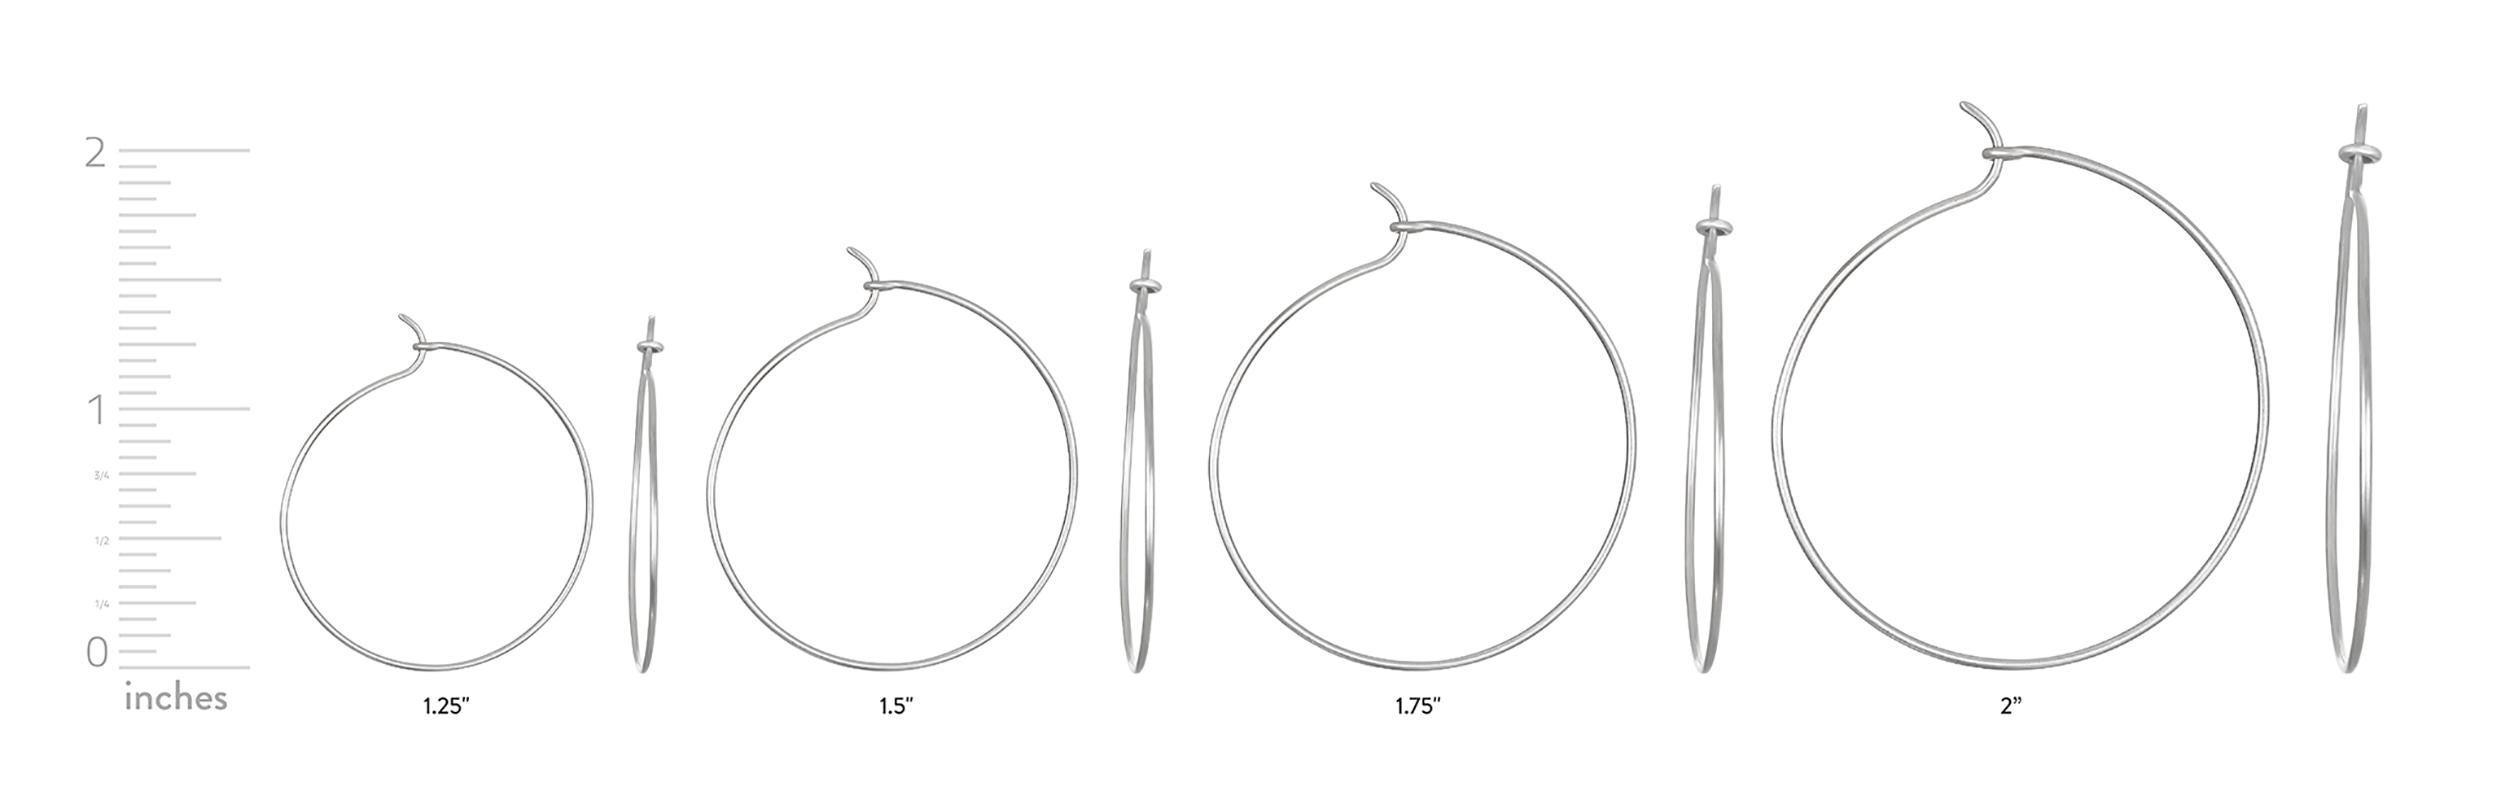 Faye Kim's Signature Platinum handmade wire hoops are a must-have for every jewelry wardrobe. Casual, chic and wearable every day, the hoops give endless opportunities to change your look with different drops, sold separately.

Hoops 1.50